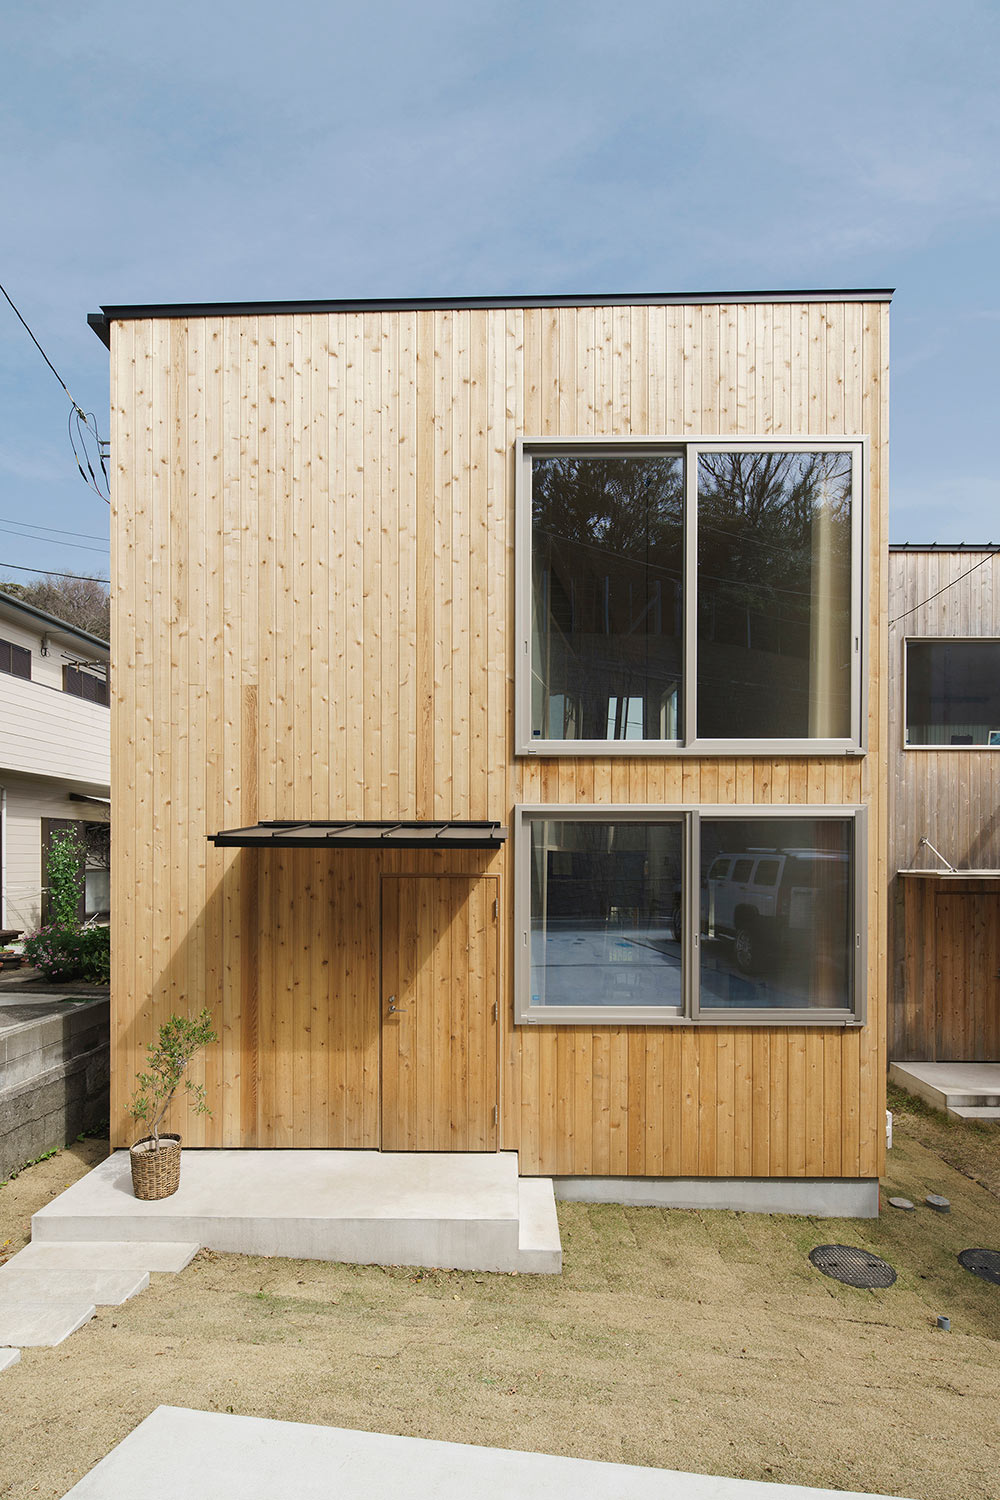 The house is clad with light colored wood on the outside and several windows bring much light in